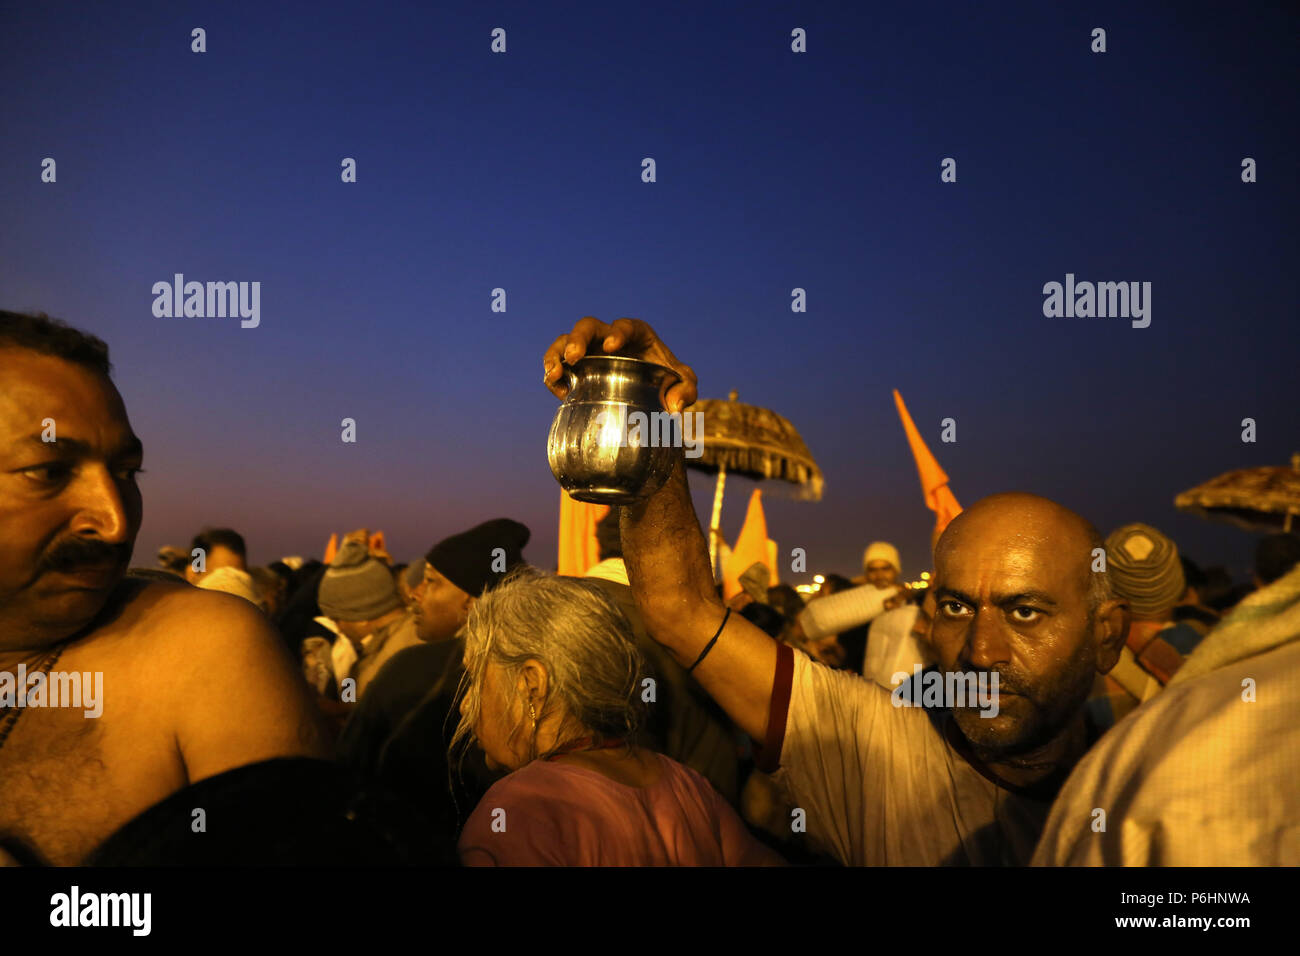 Man carries a jug with holy water from ganges river during Maha Kumbh mela 2013 in Allahabad , India Stock Photo